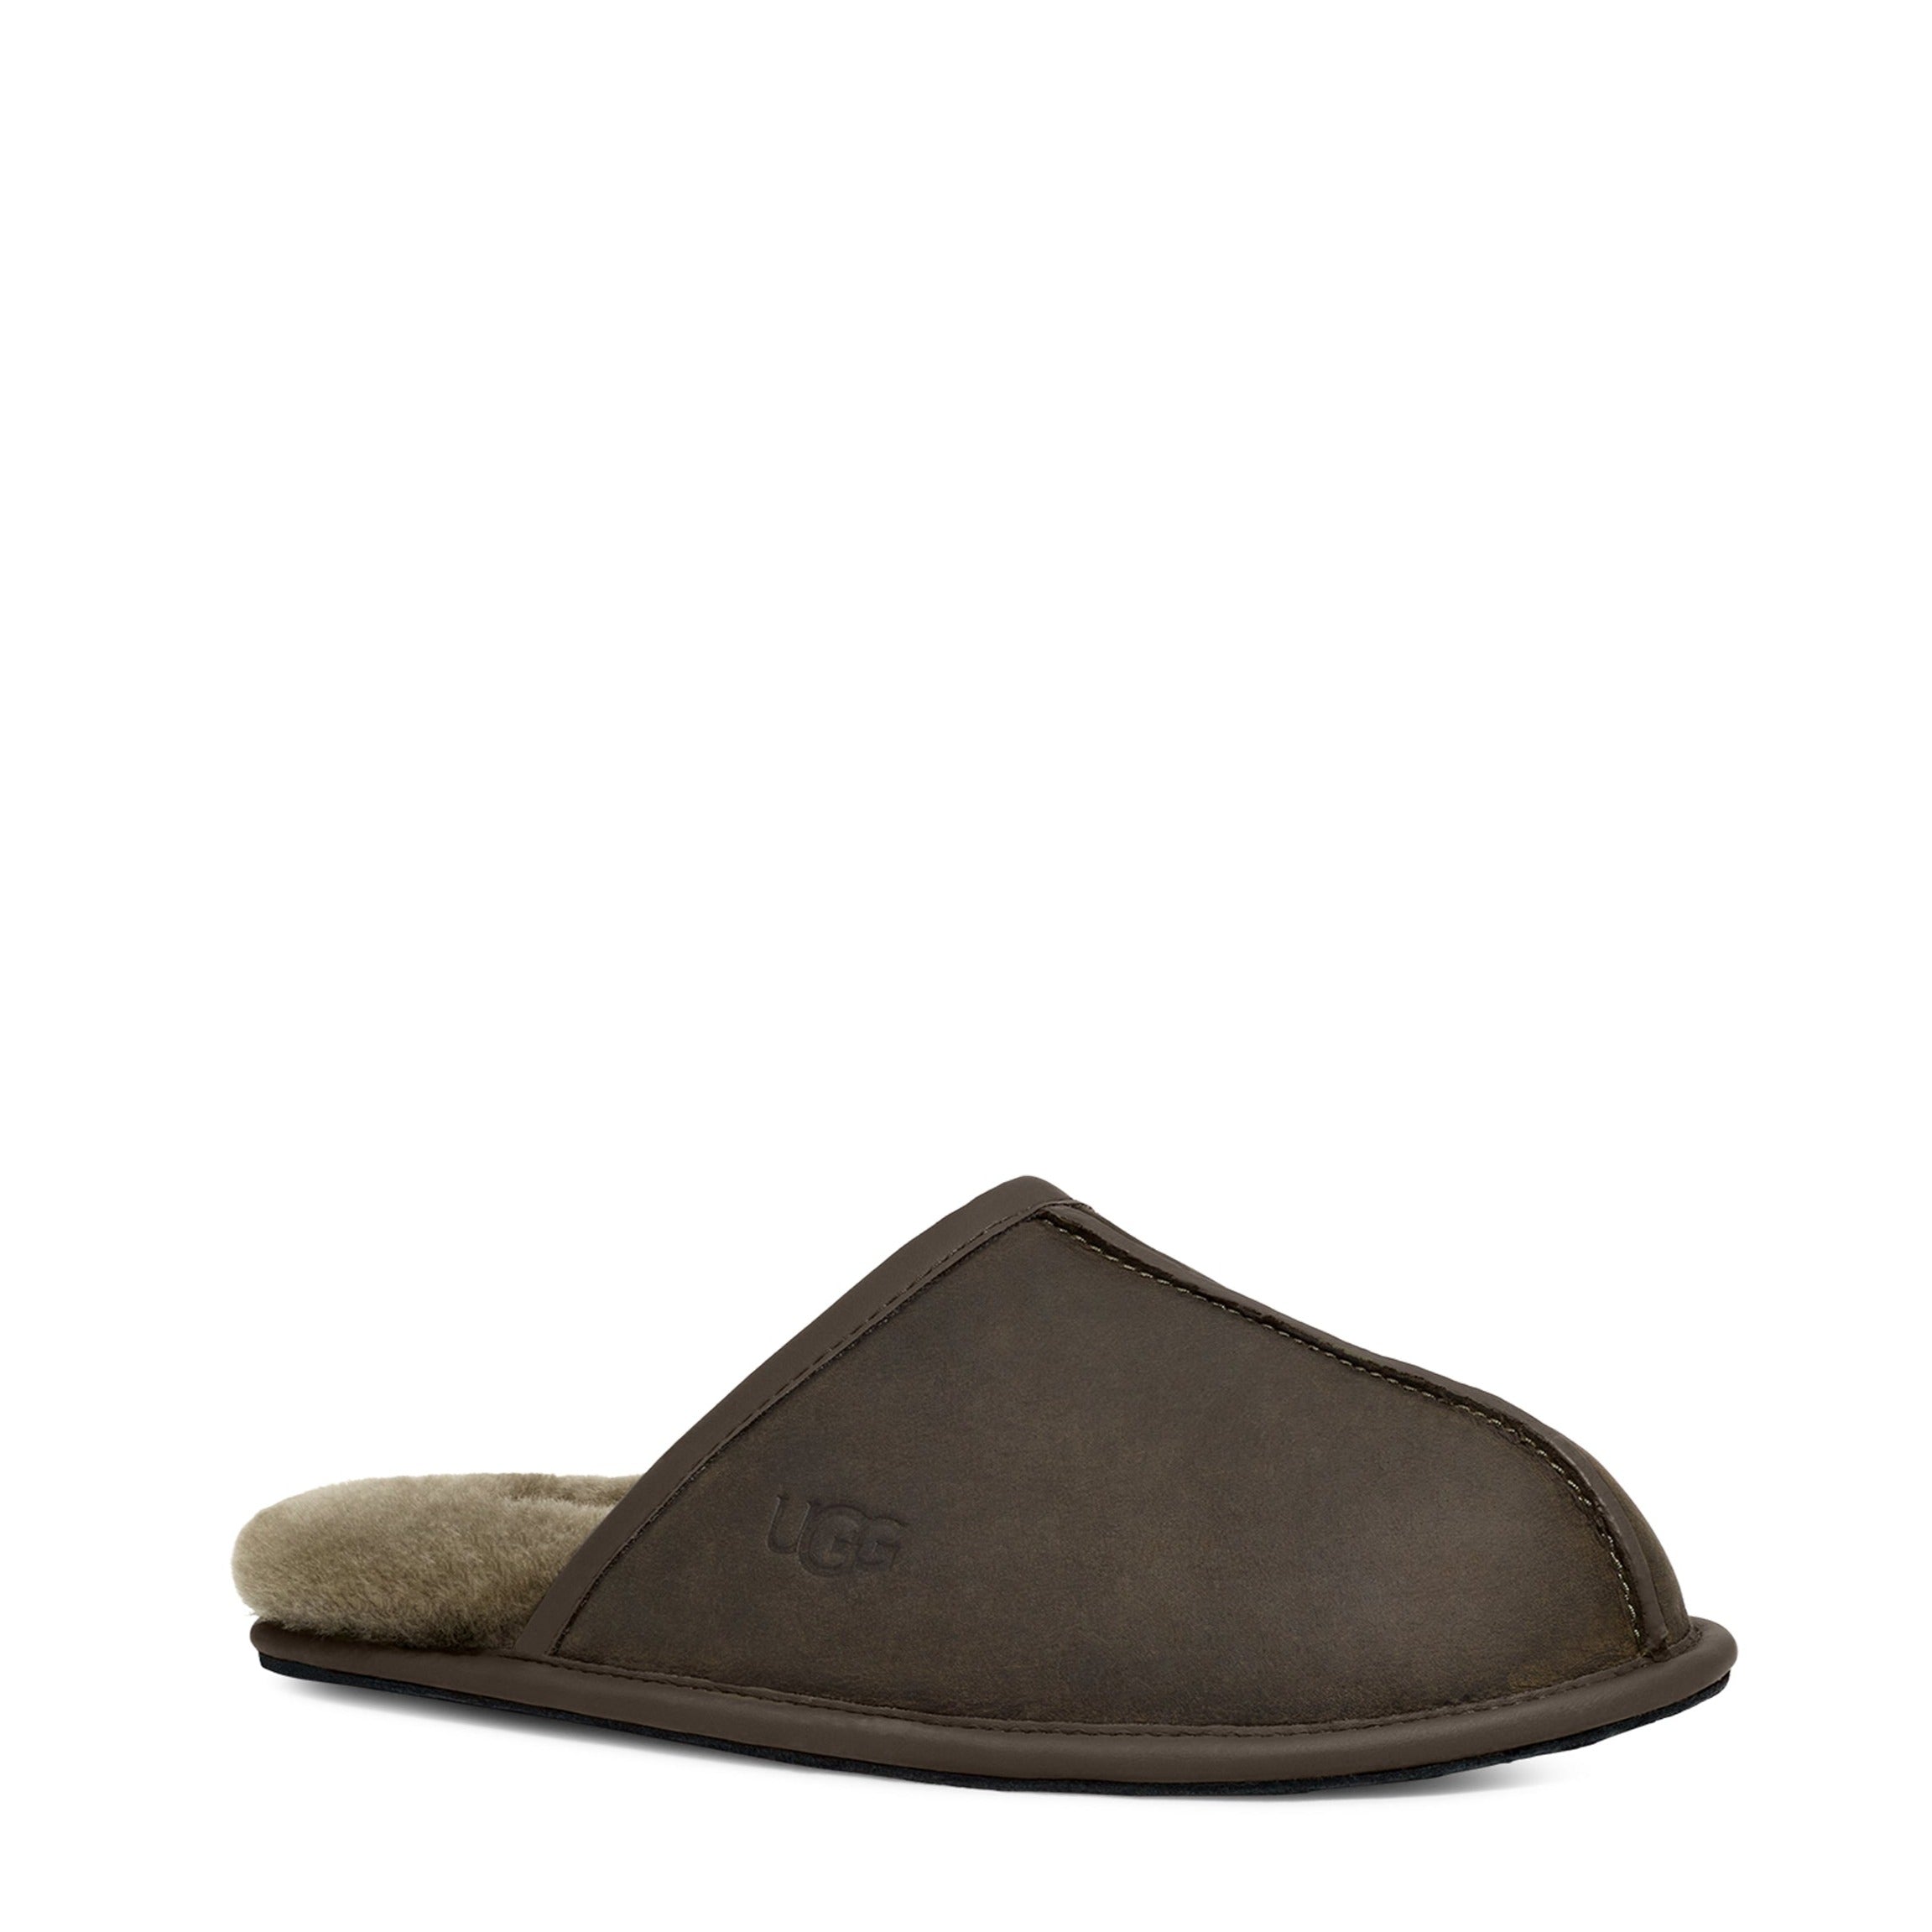 Sample UGG Scuff Leather Slippers   